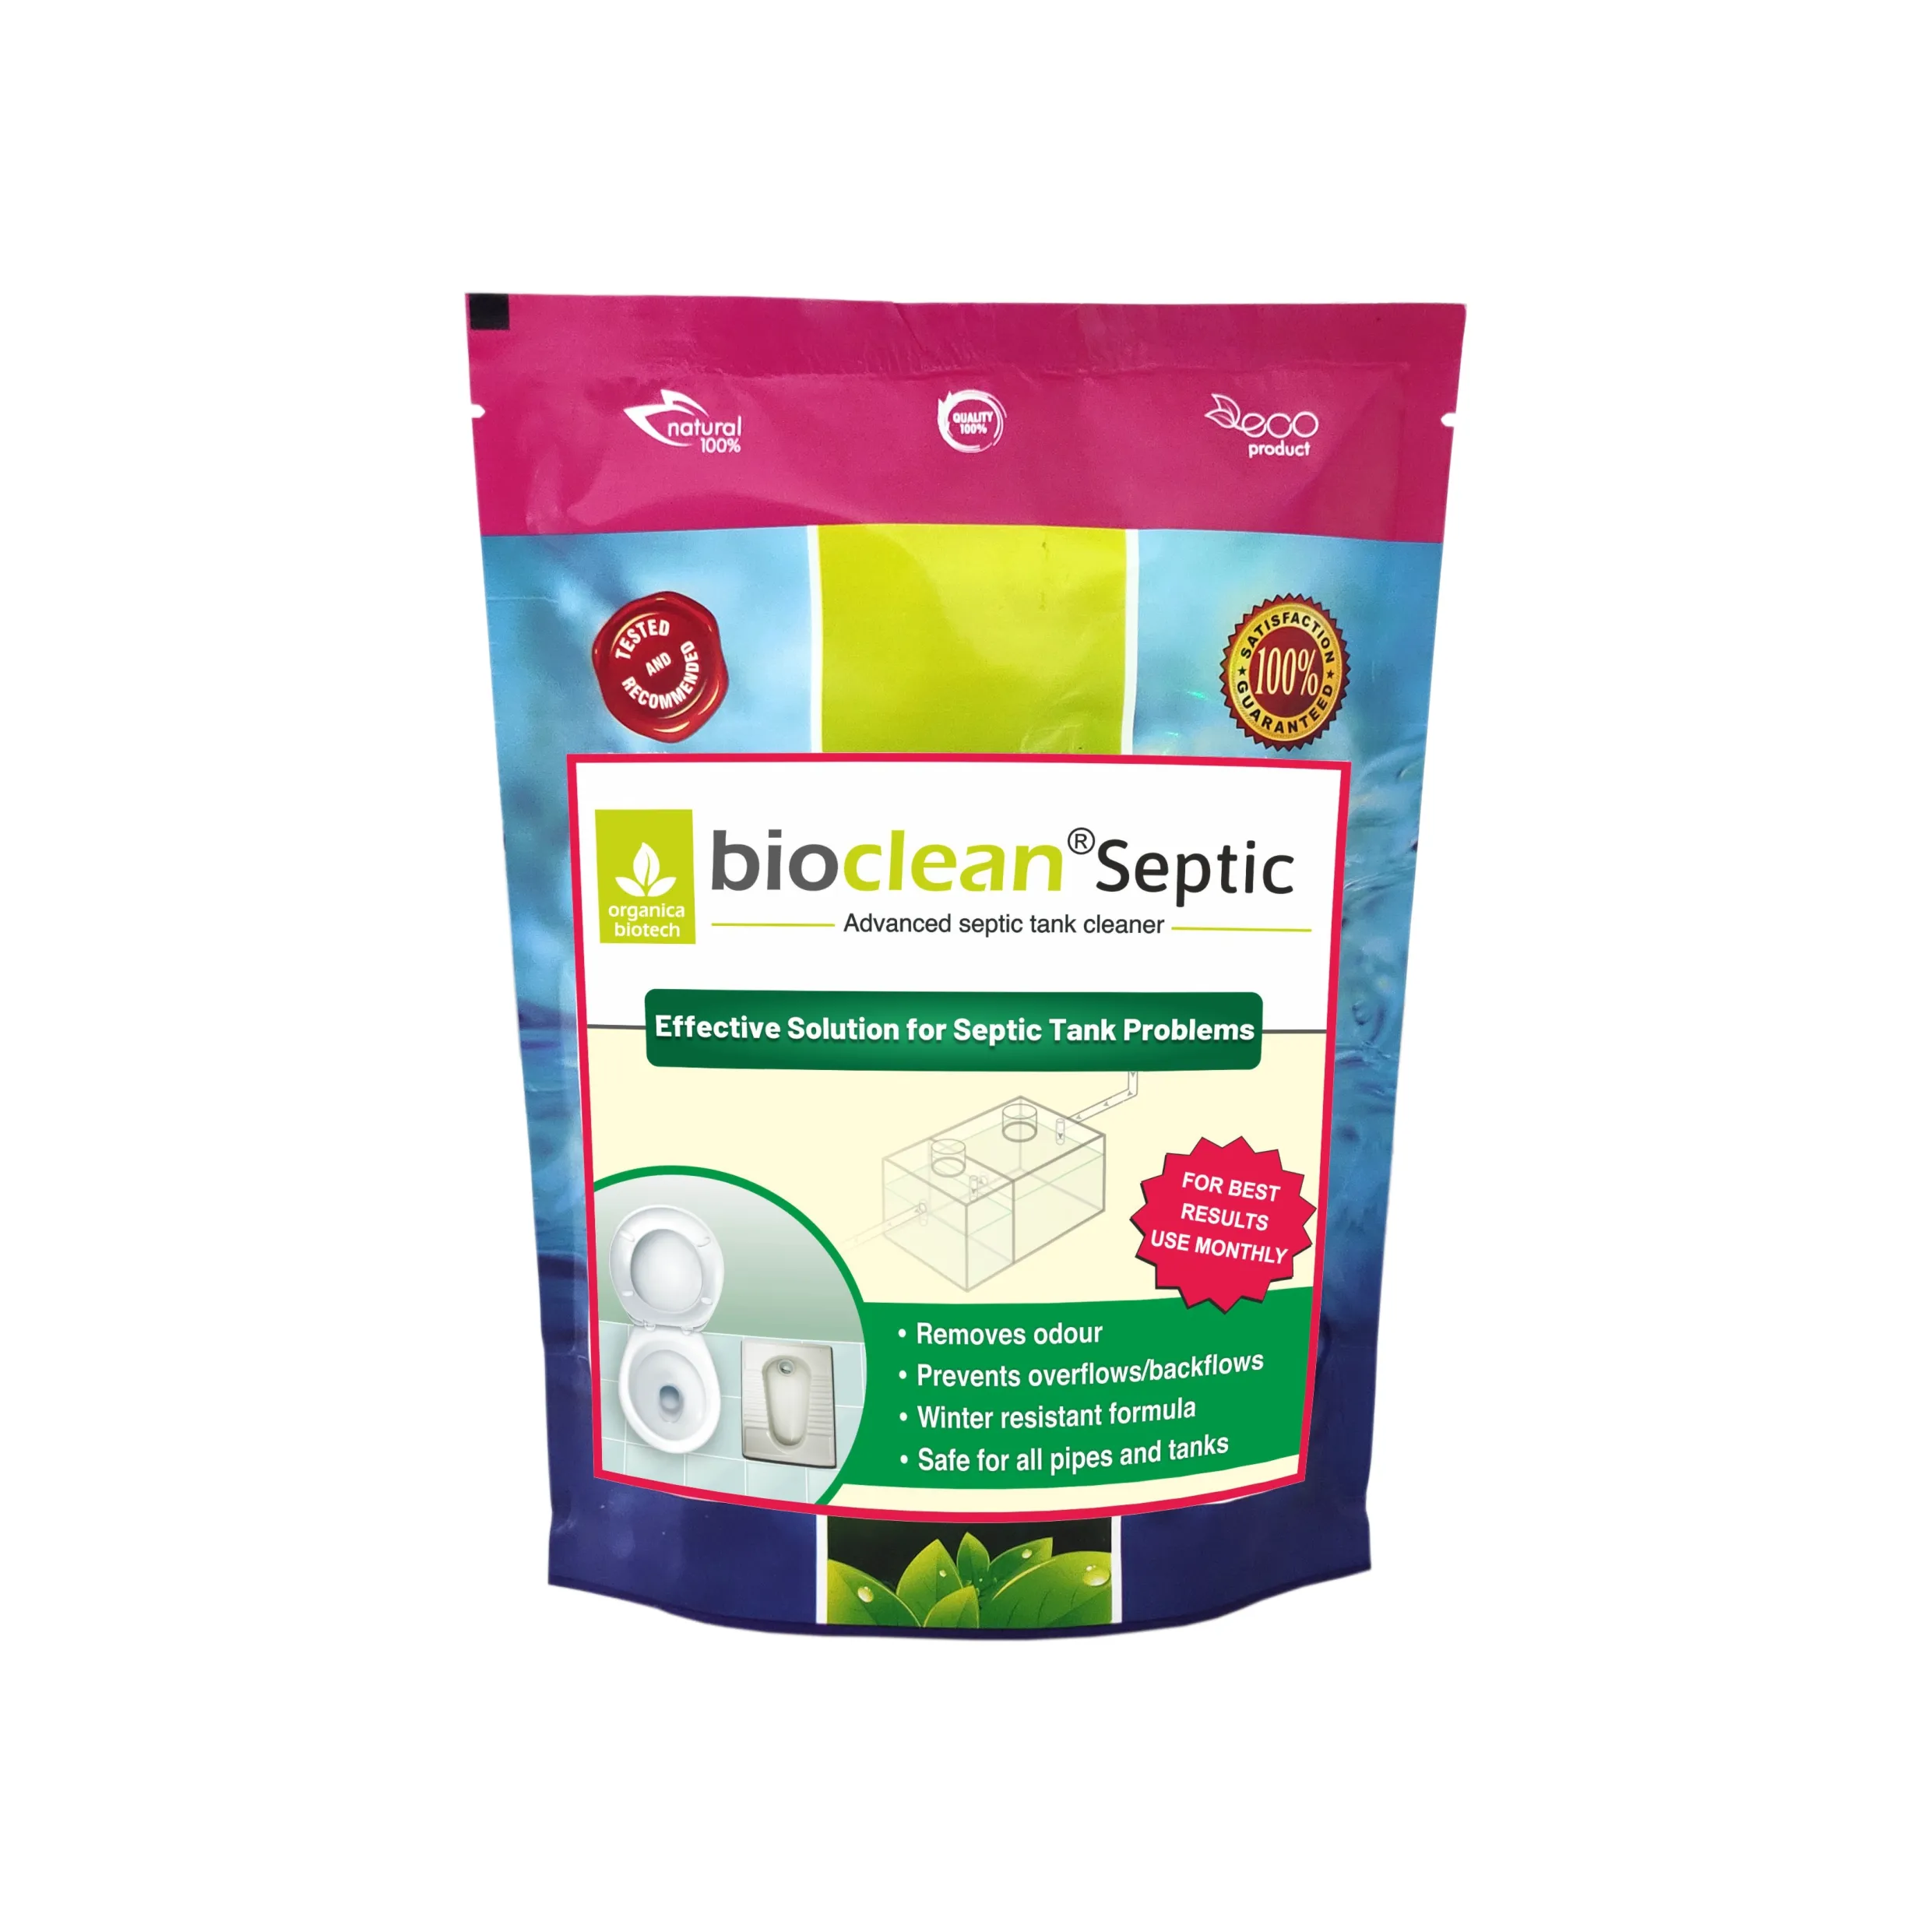 Bioclean Septic Plus - Safe cleaning products and odor eliminator for septic tanks bacteria for septic tank cleaning